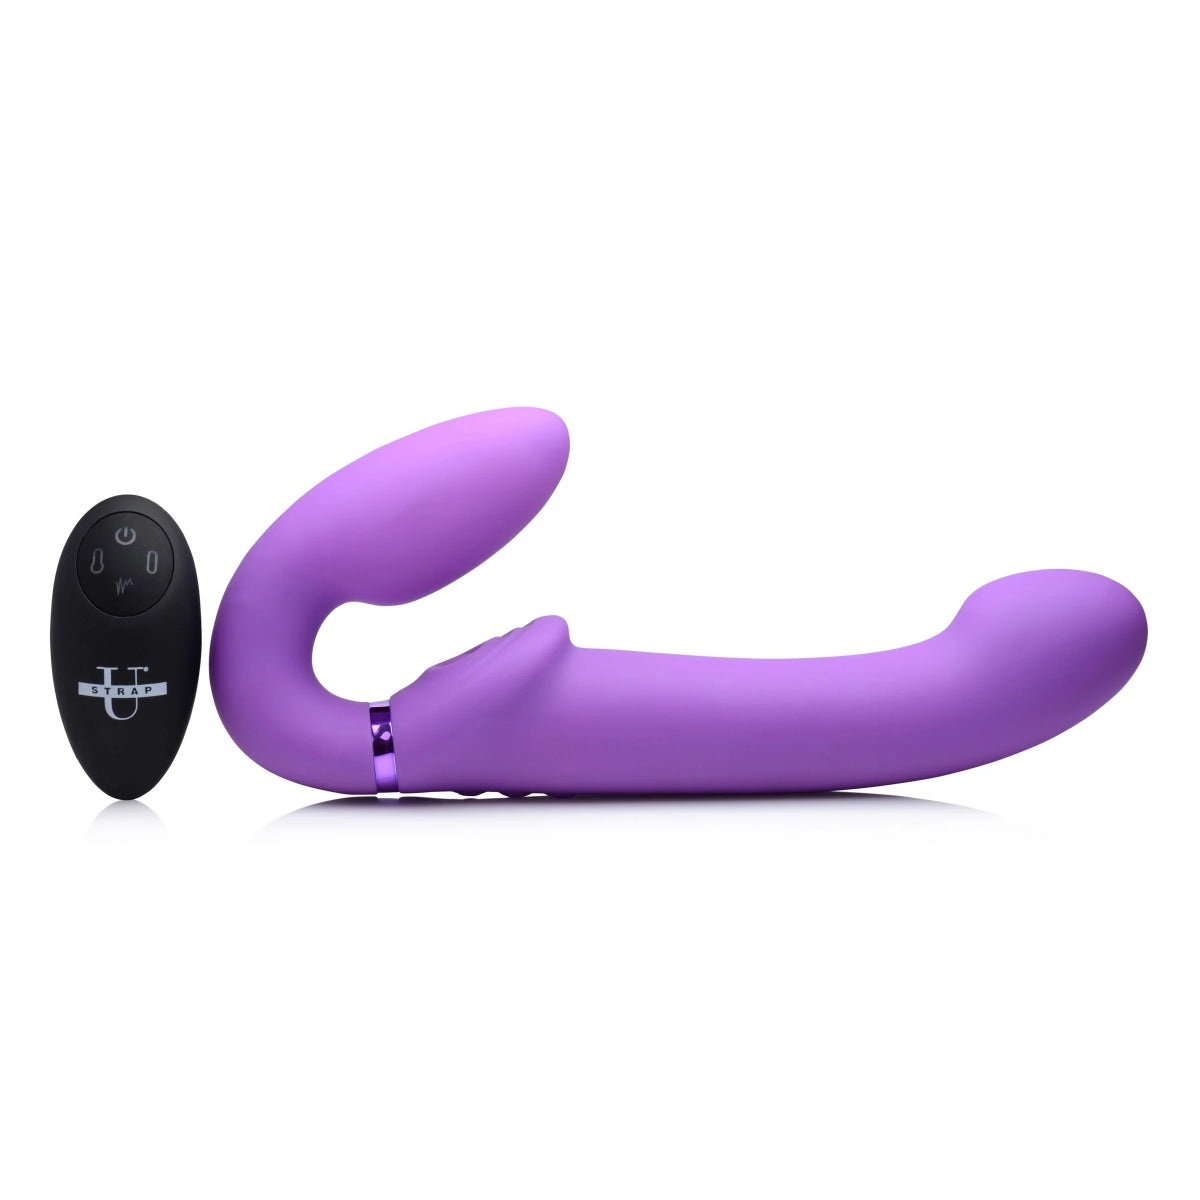 Strap U 10X Ergo Fit G-Pulse Inflatable & Vibrating Strapless Strap-On Purple